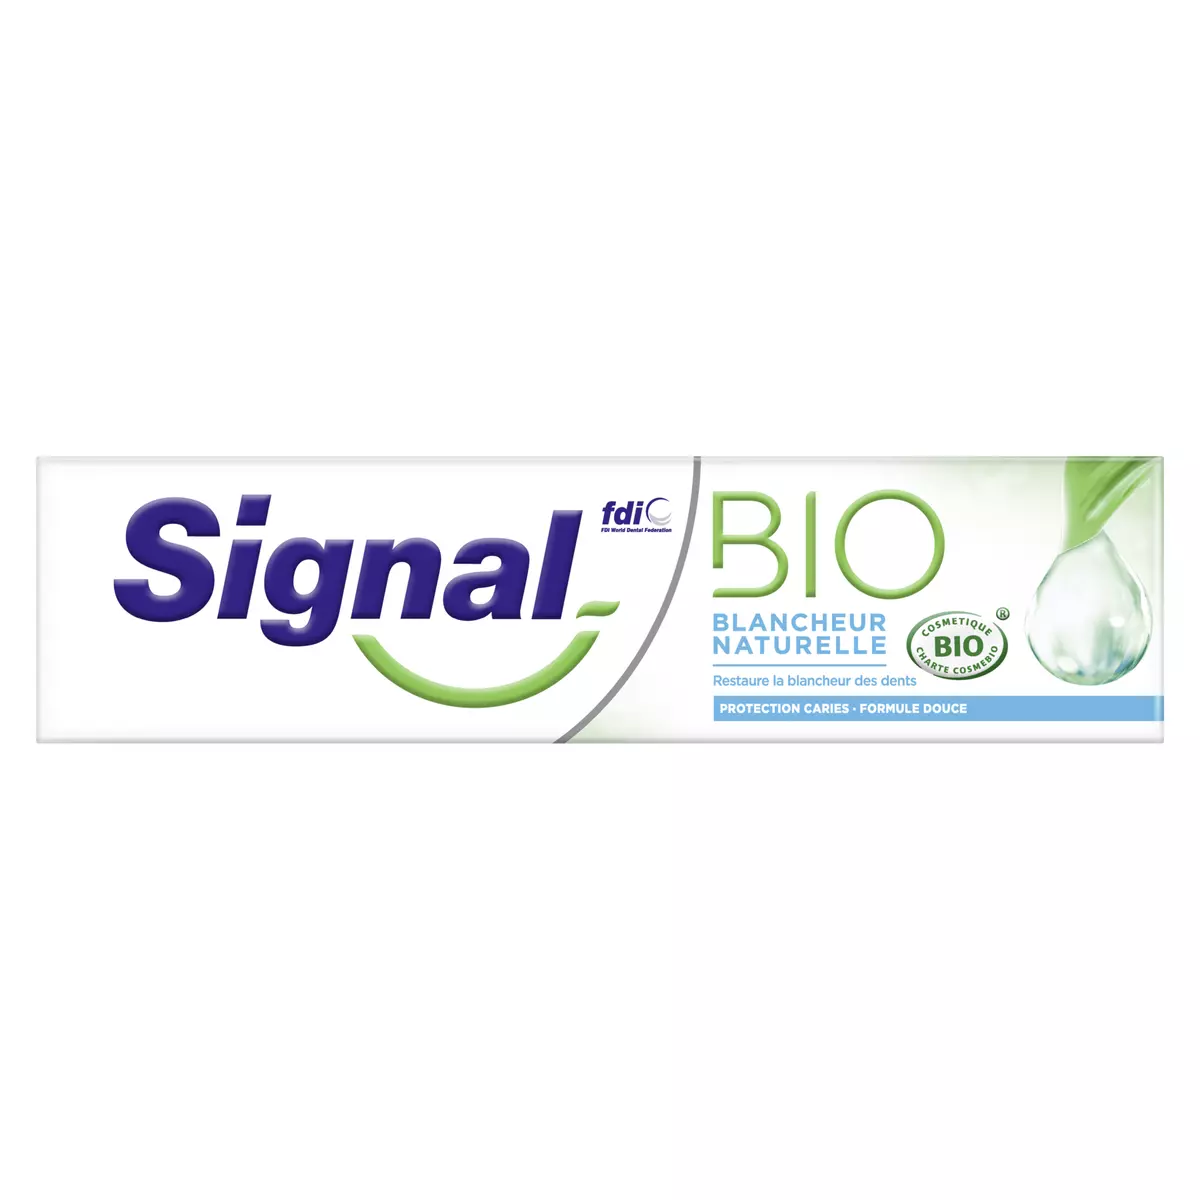 SIGNAL BIO Dentifrice blancheur naturelle & protection caries 75ml